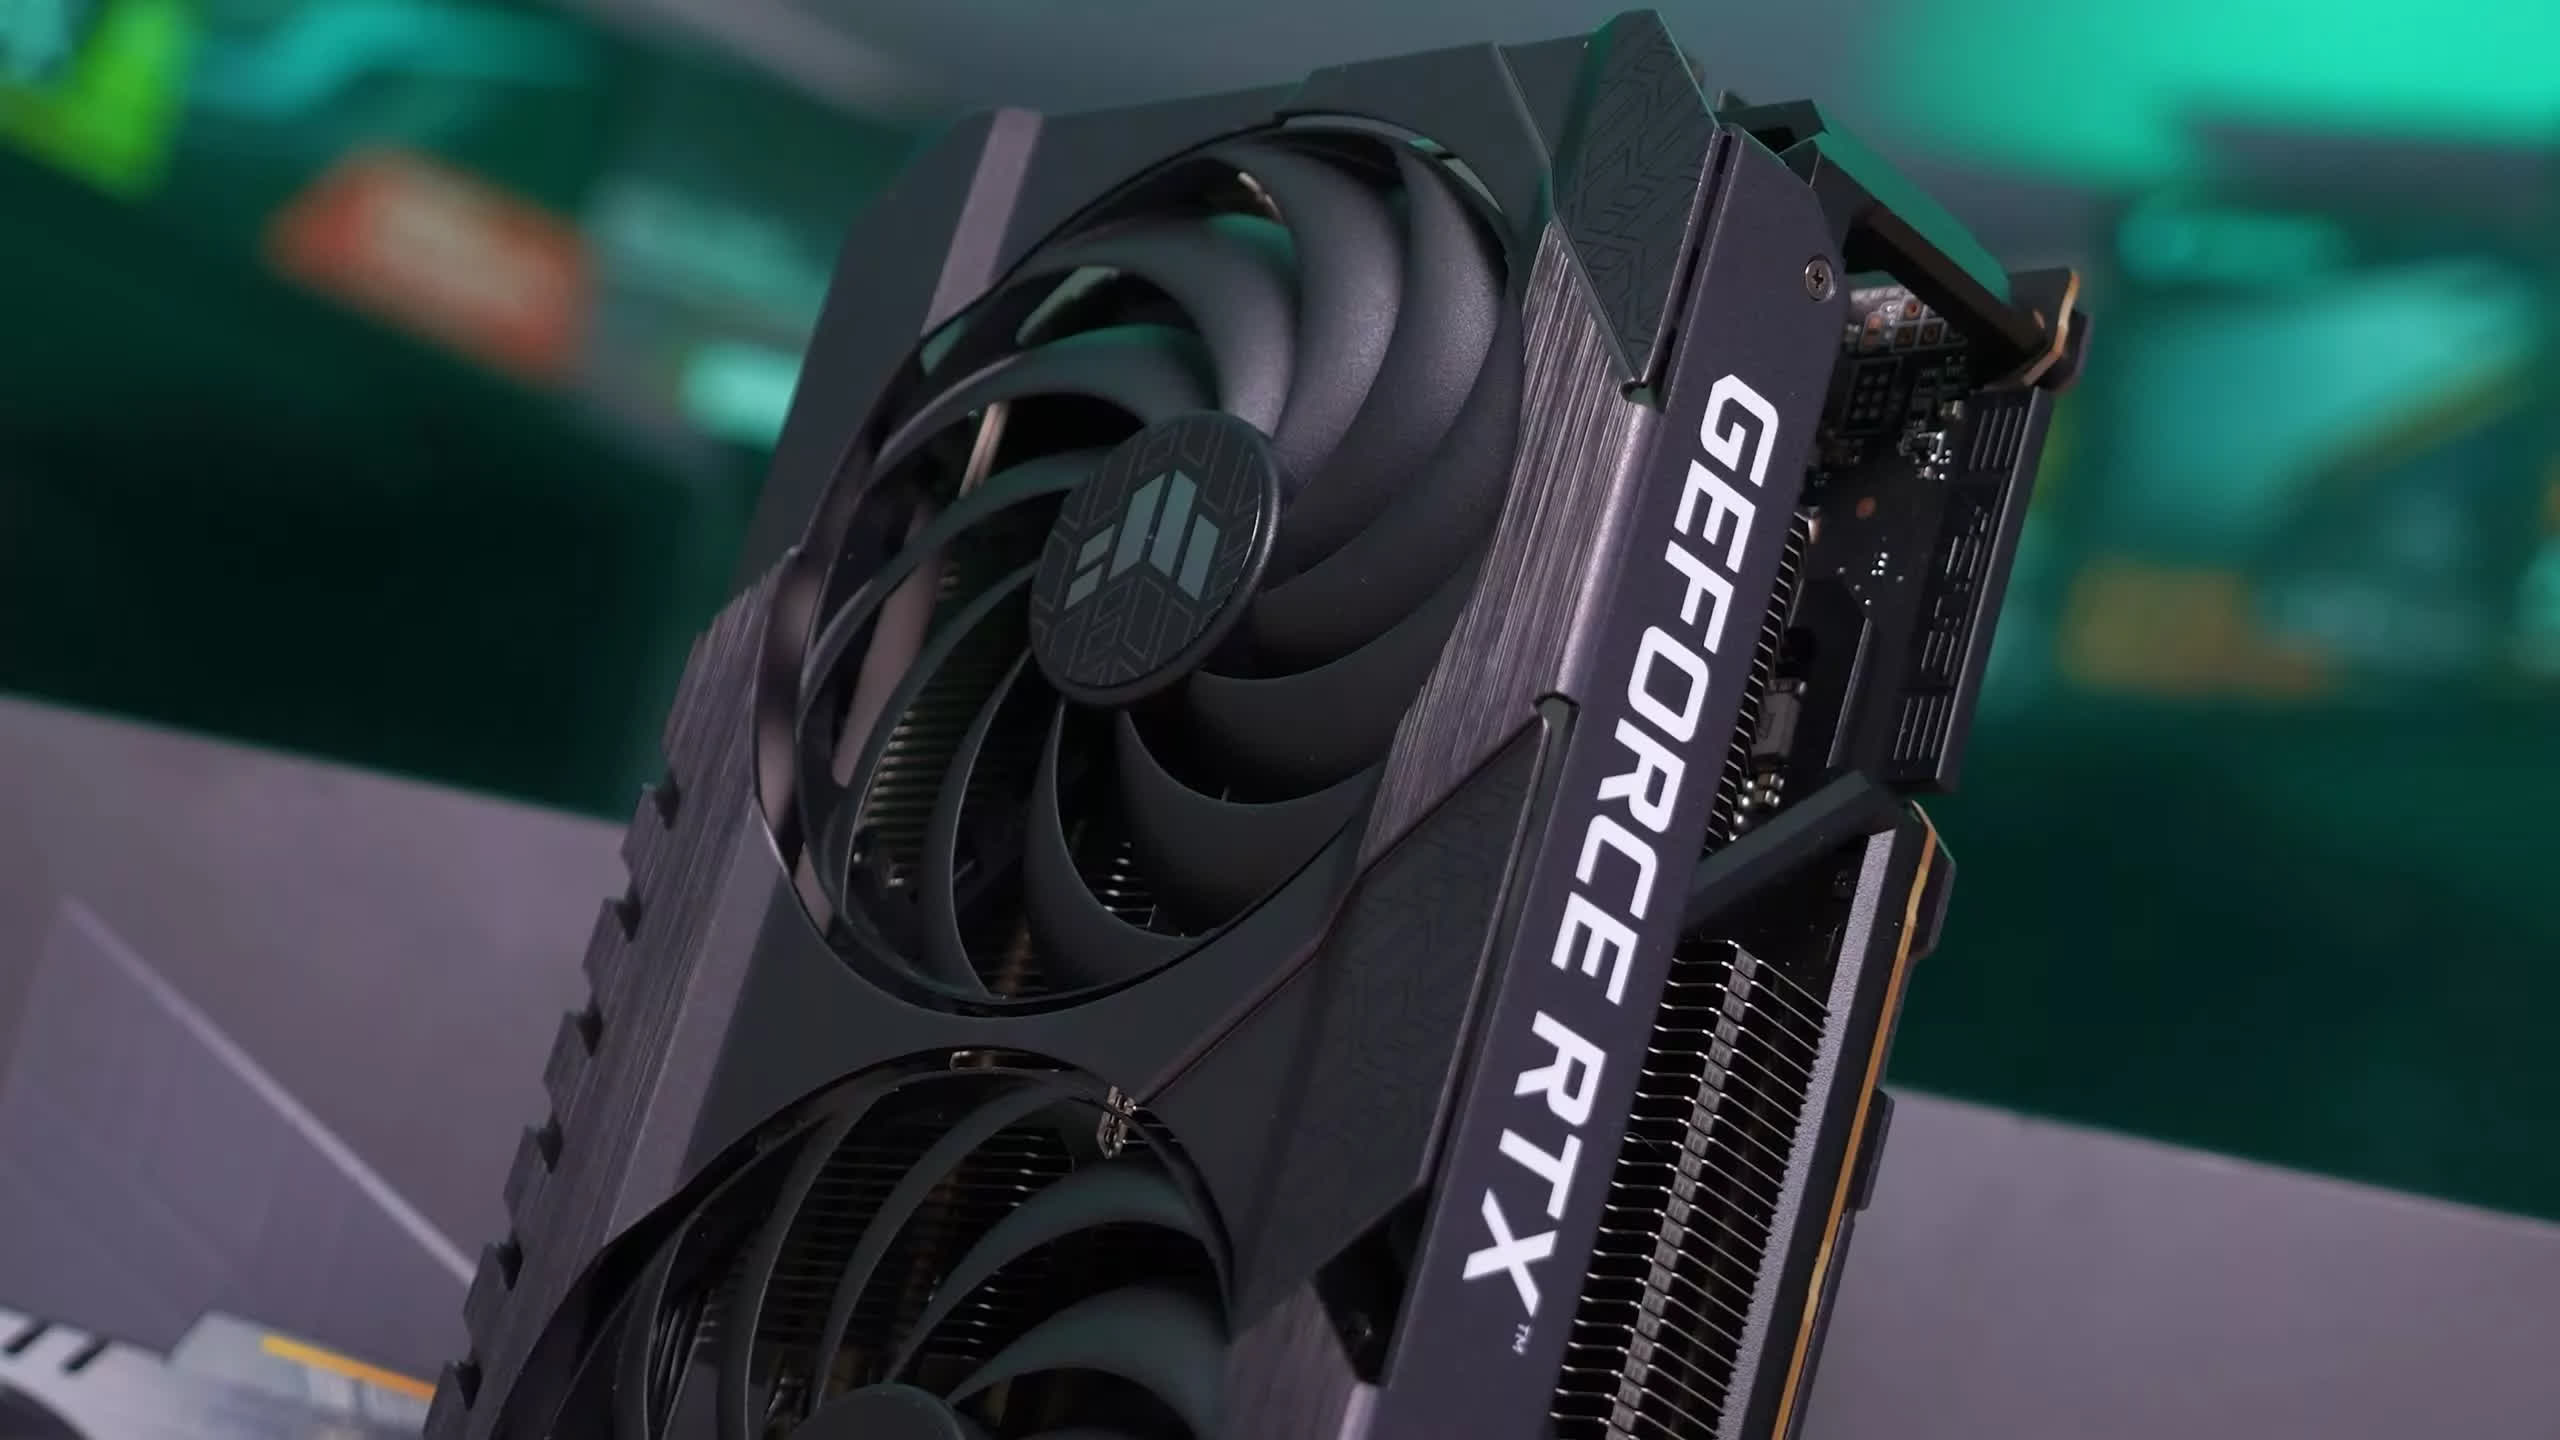 Nvidia looks set to reduce graphics card prices even further